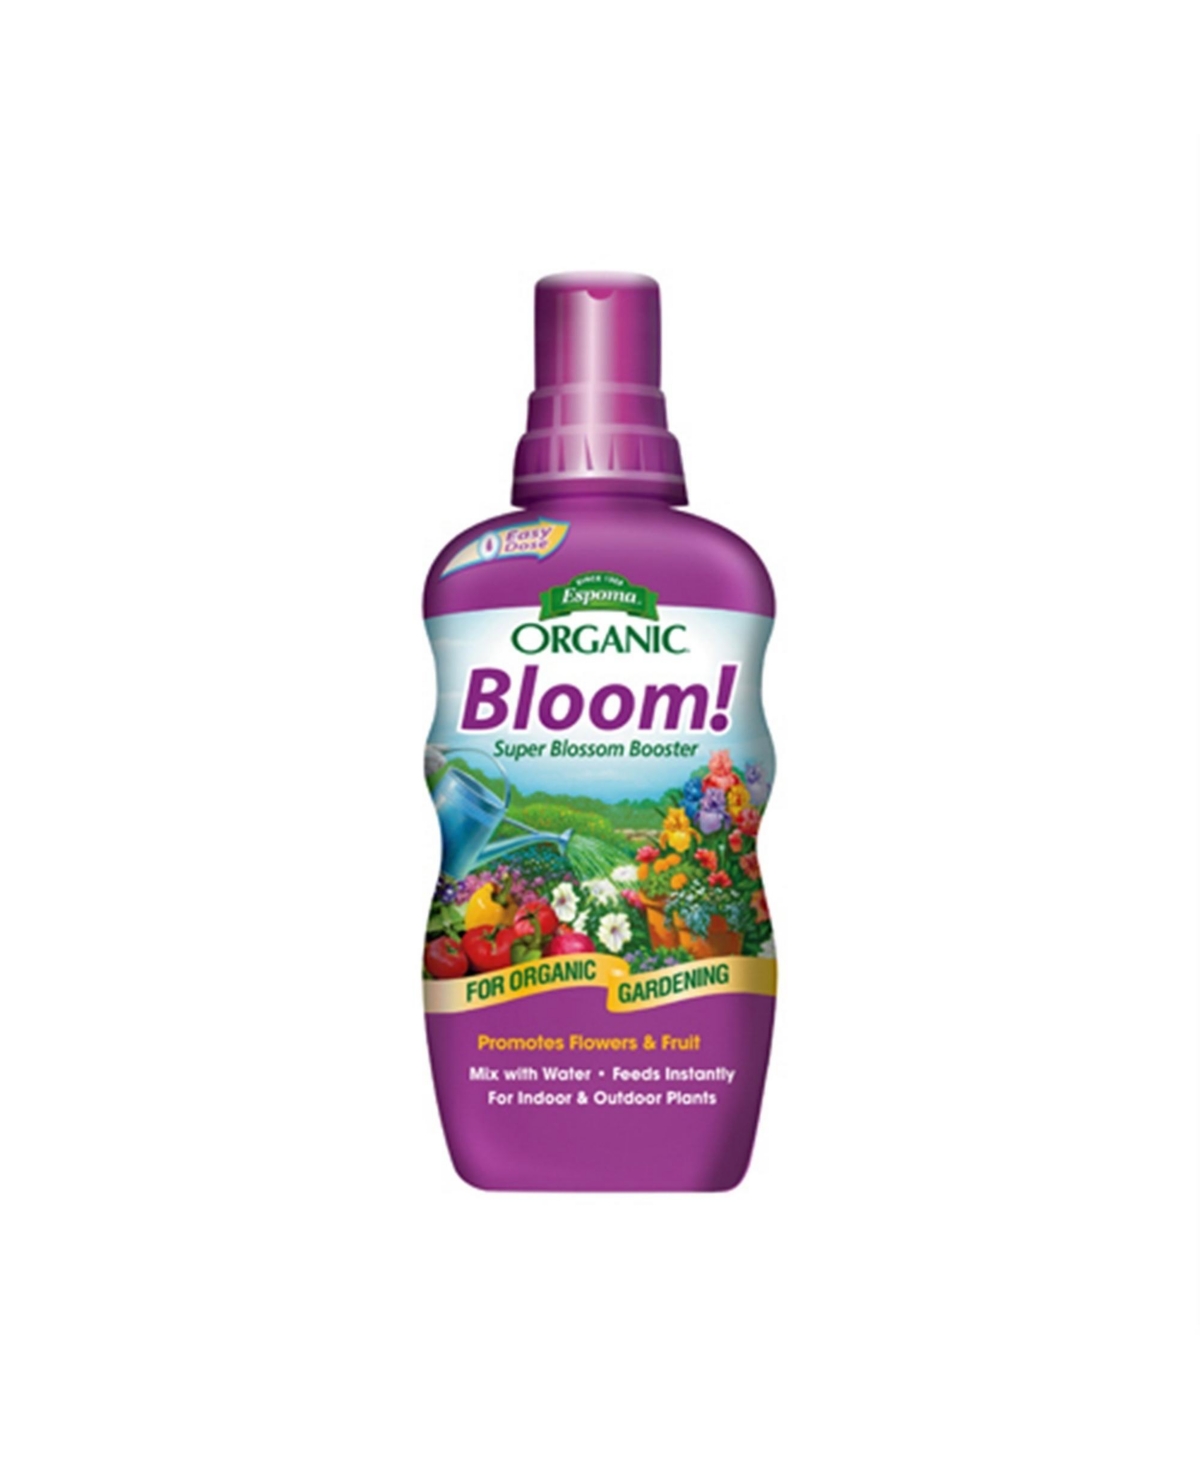 Bloom Natural and Organic Super Blossom Booster, 16 fl oz - Brown